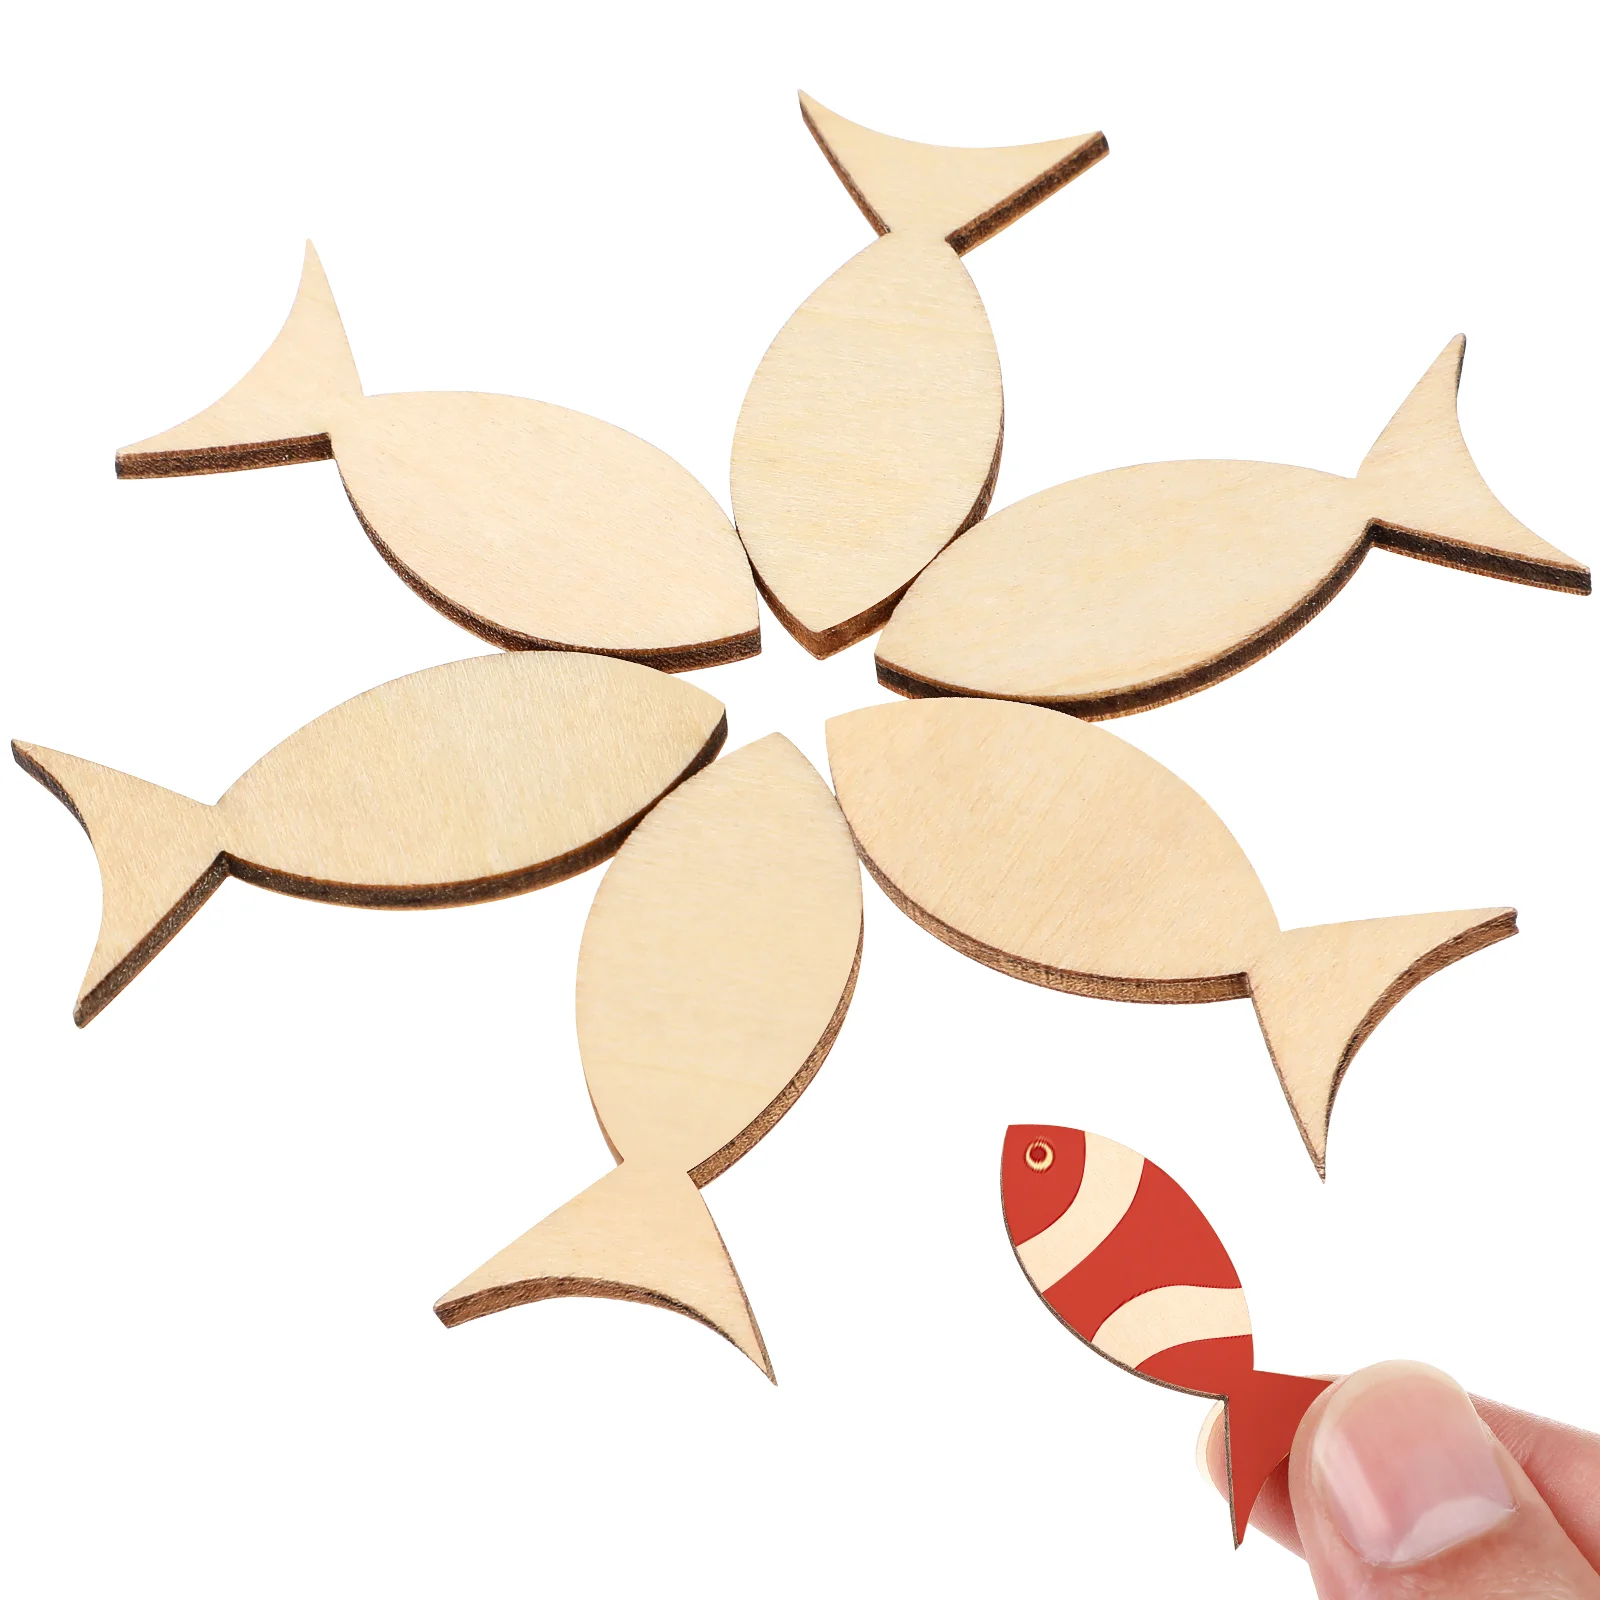 

100 Pcs Wooden Solid Fish Craft Embellishments Shape Tag Labels Plates Shapes Gift Card Making Chip Slices Crafts Tags